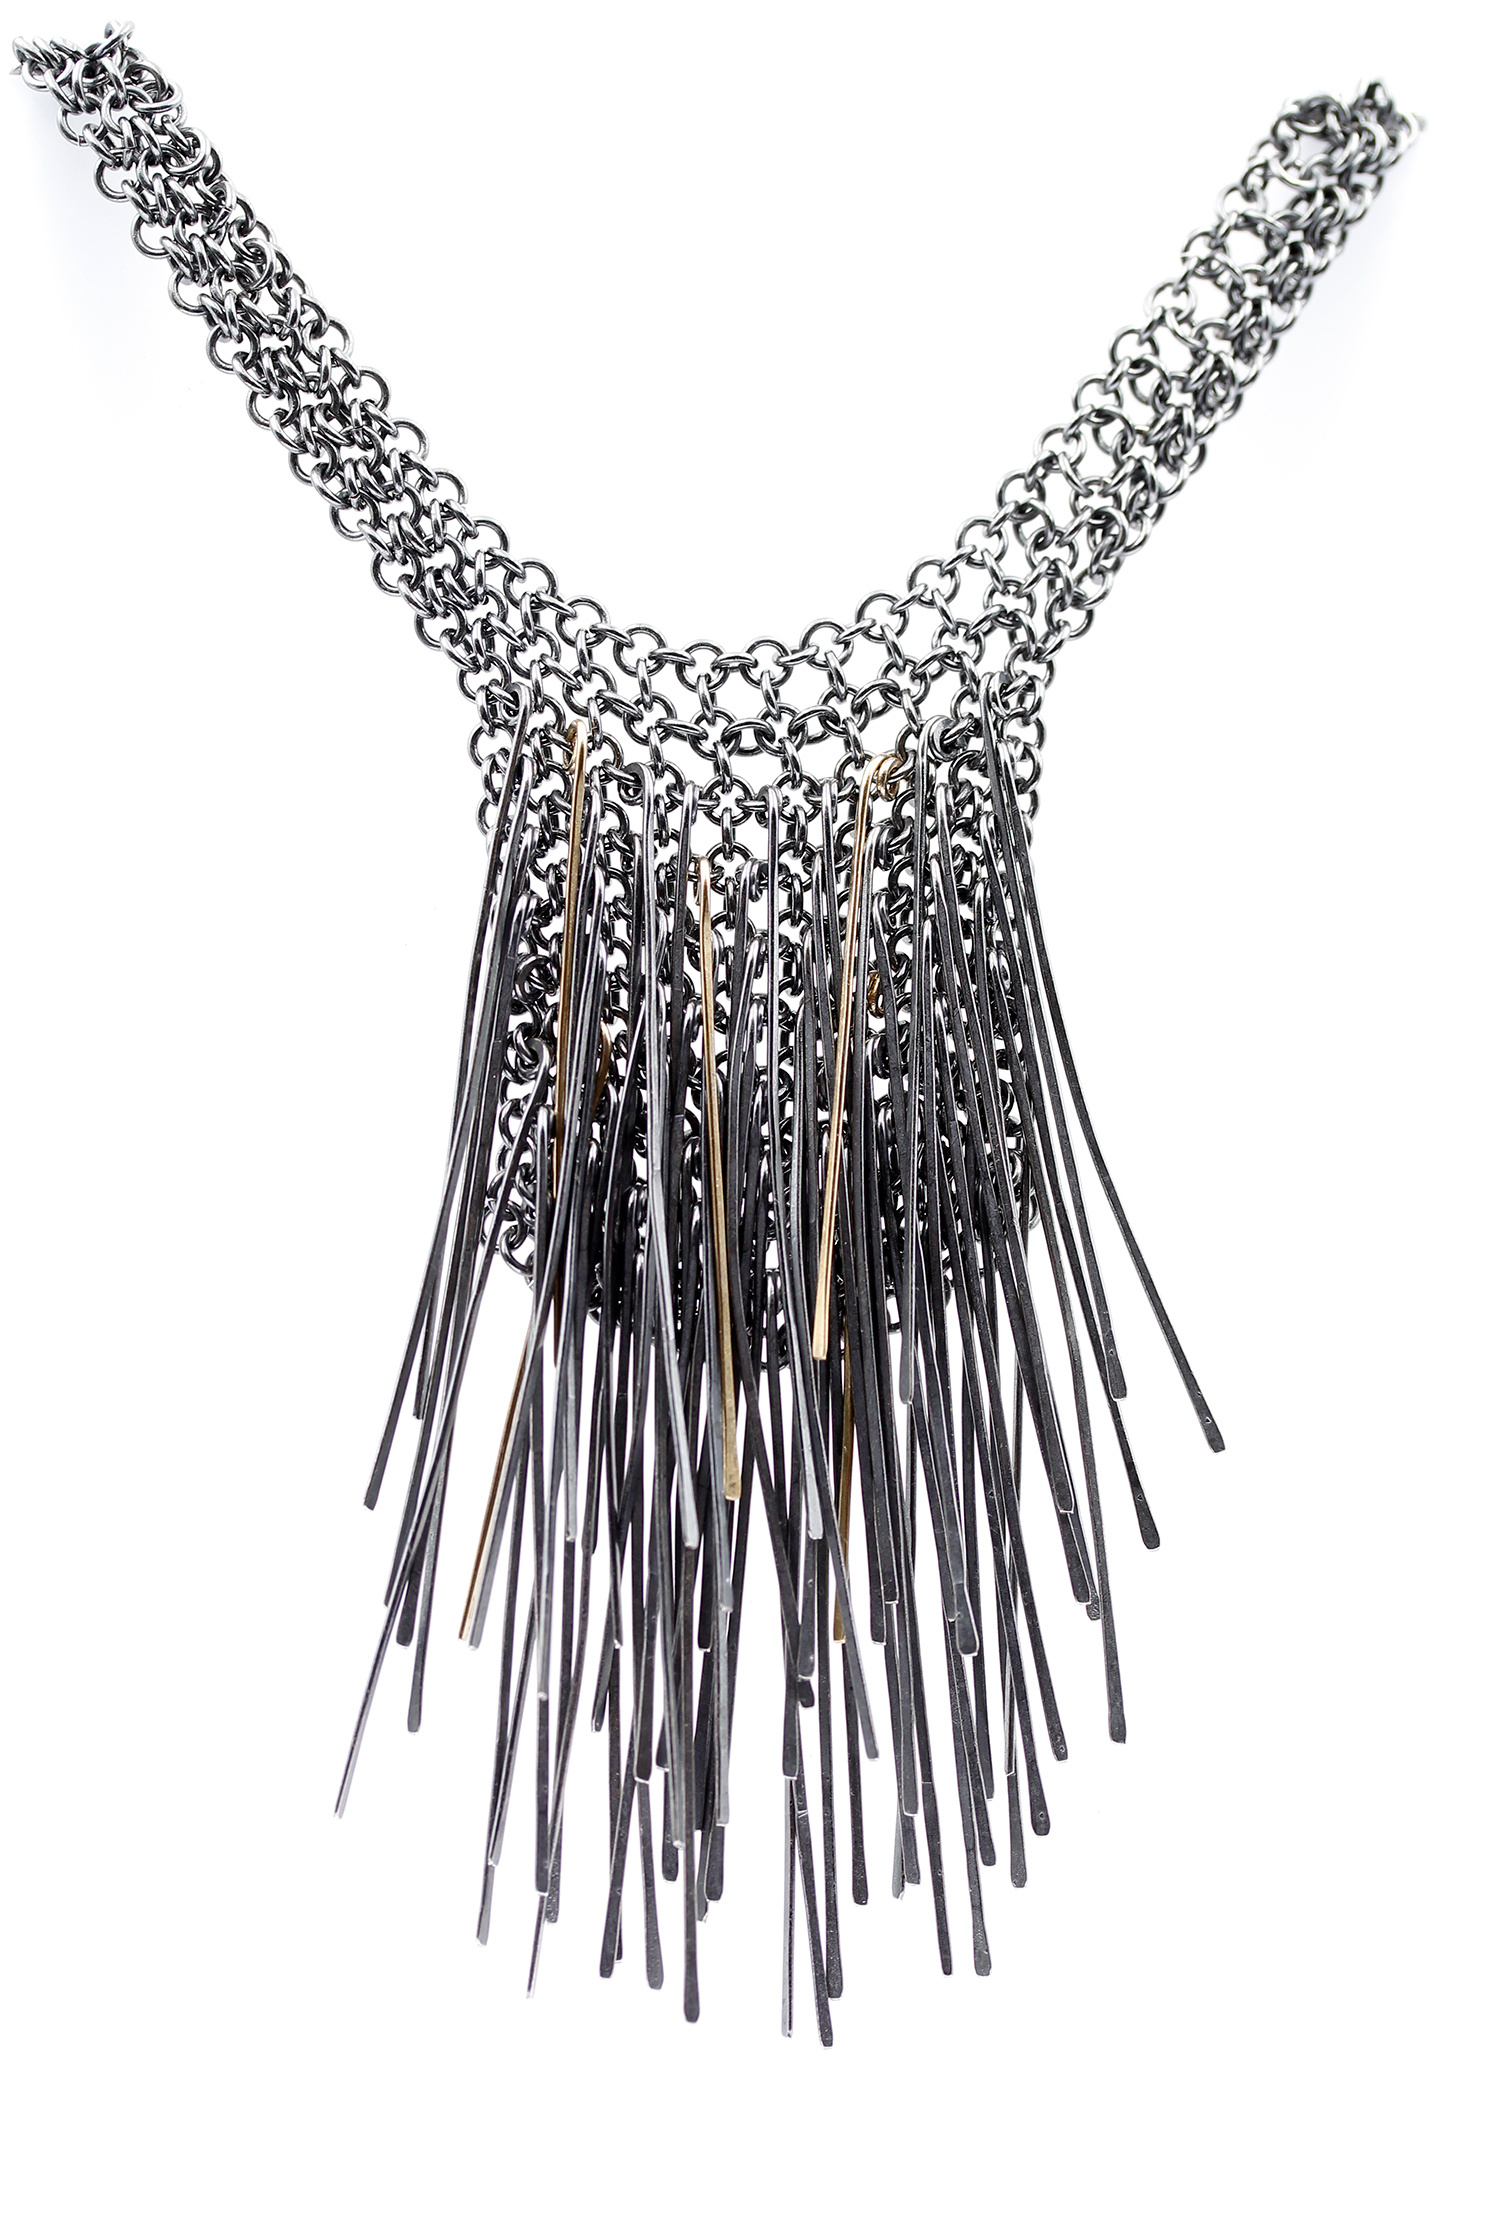 'Spike' Necklace by Alison Evans